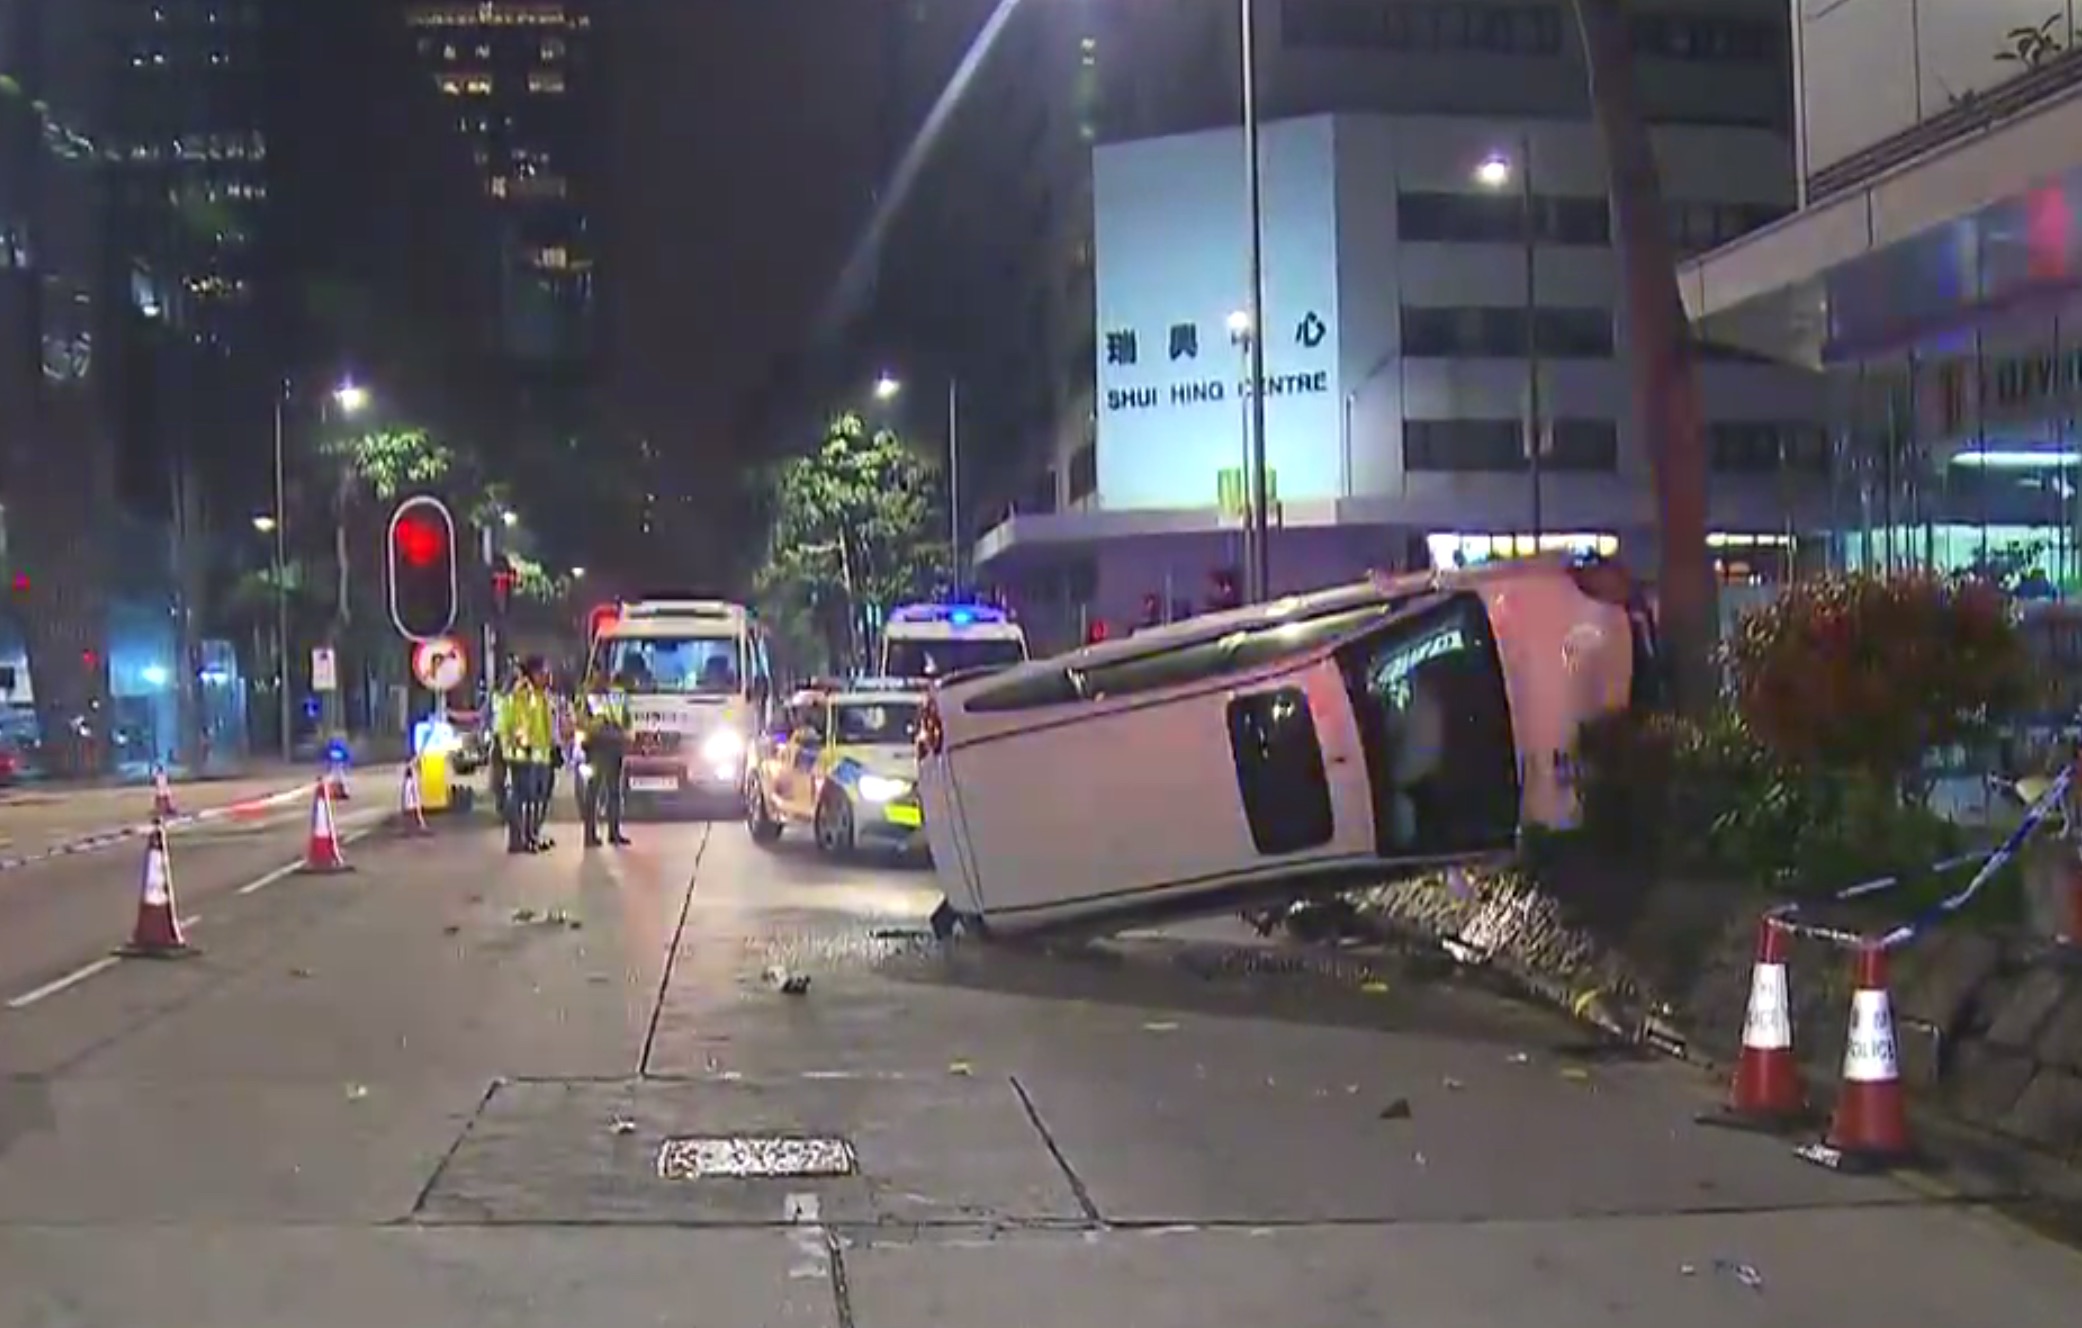 The scene of a car that brought an end to a high-speed police chase through Kowloon early this morning. Screengrab via TVB.